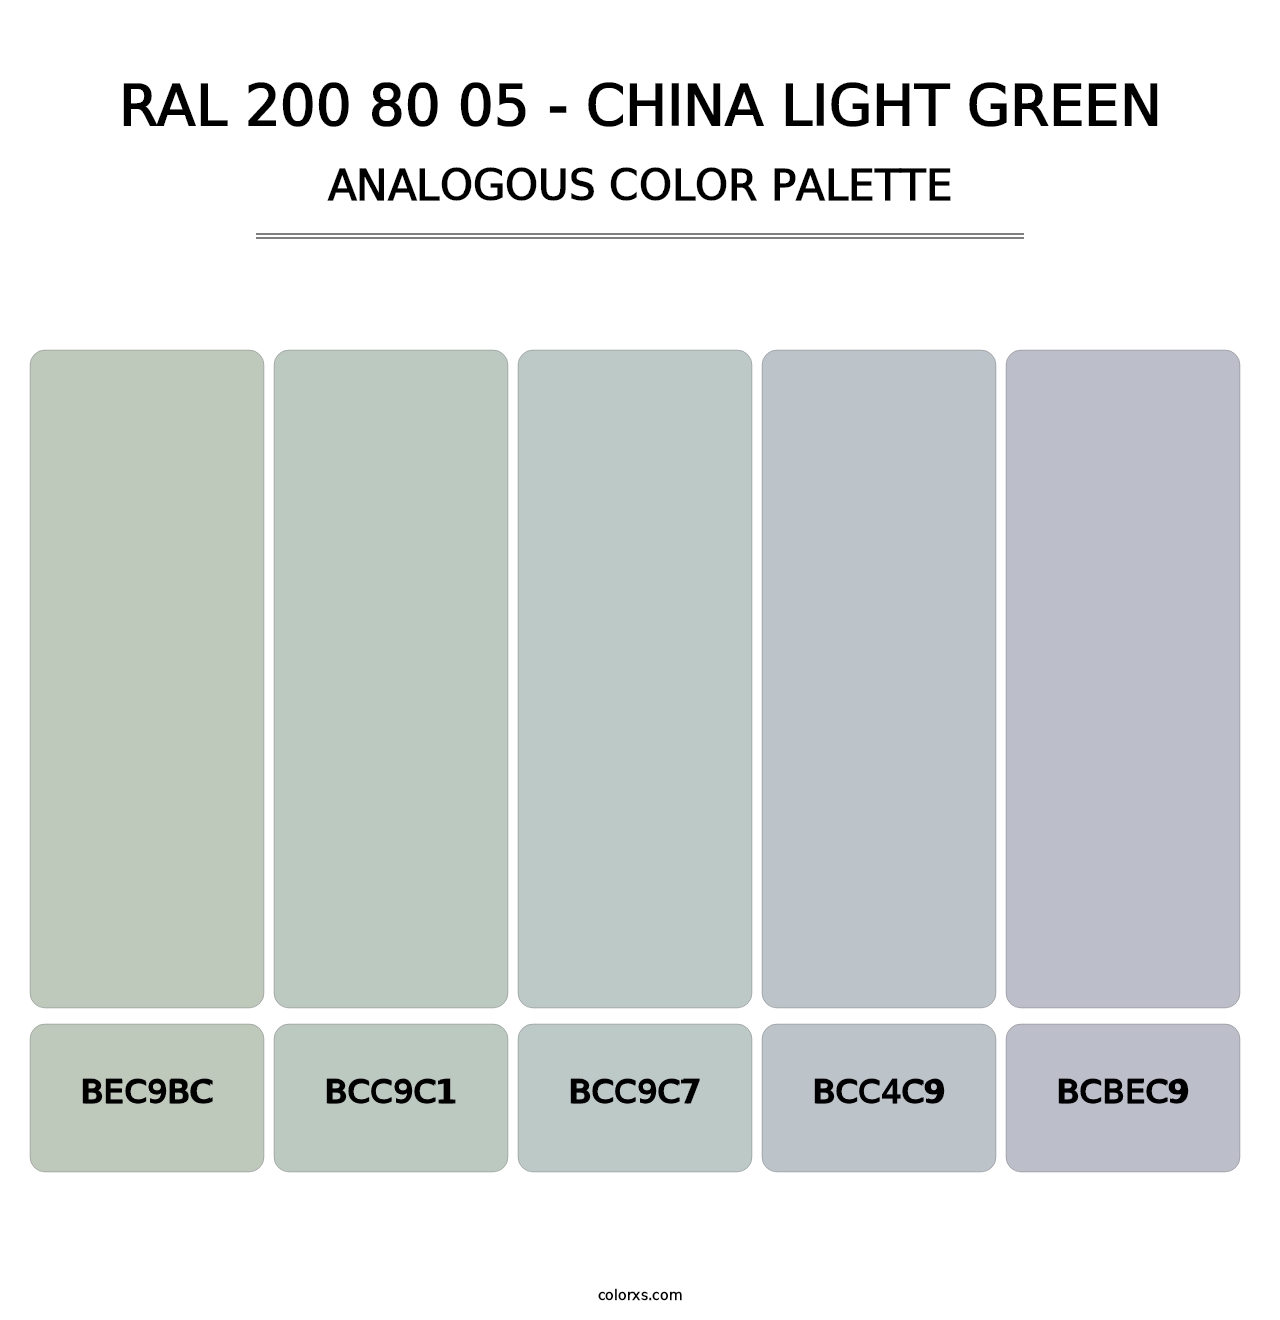 RAL 200 80 05 - China Light Green - Analogous Color Palette